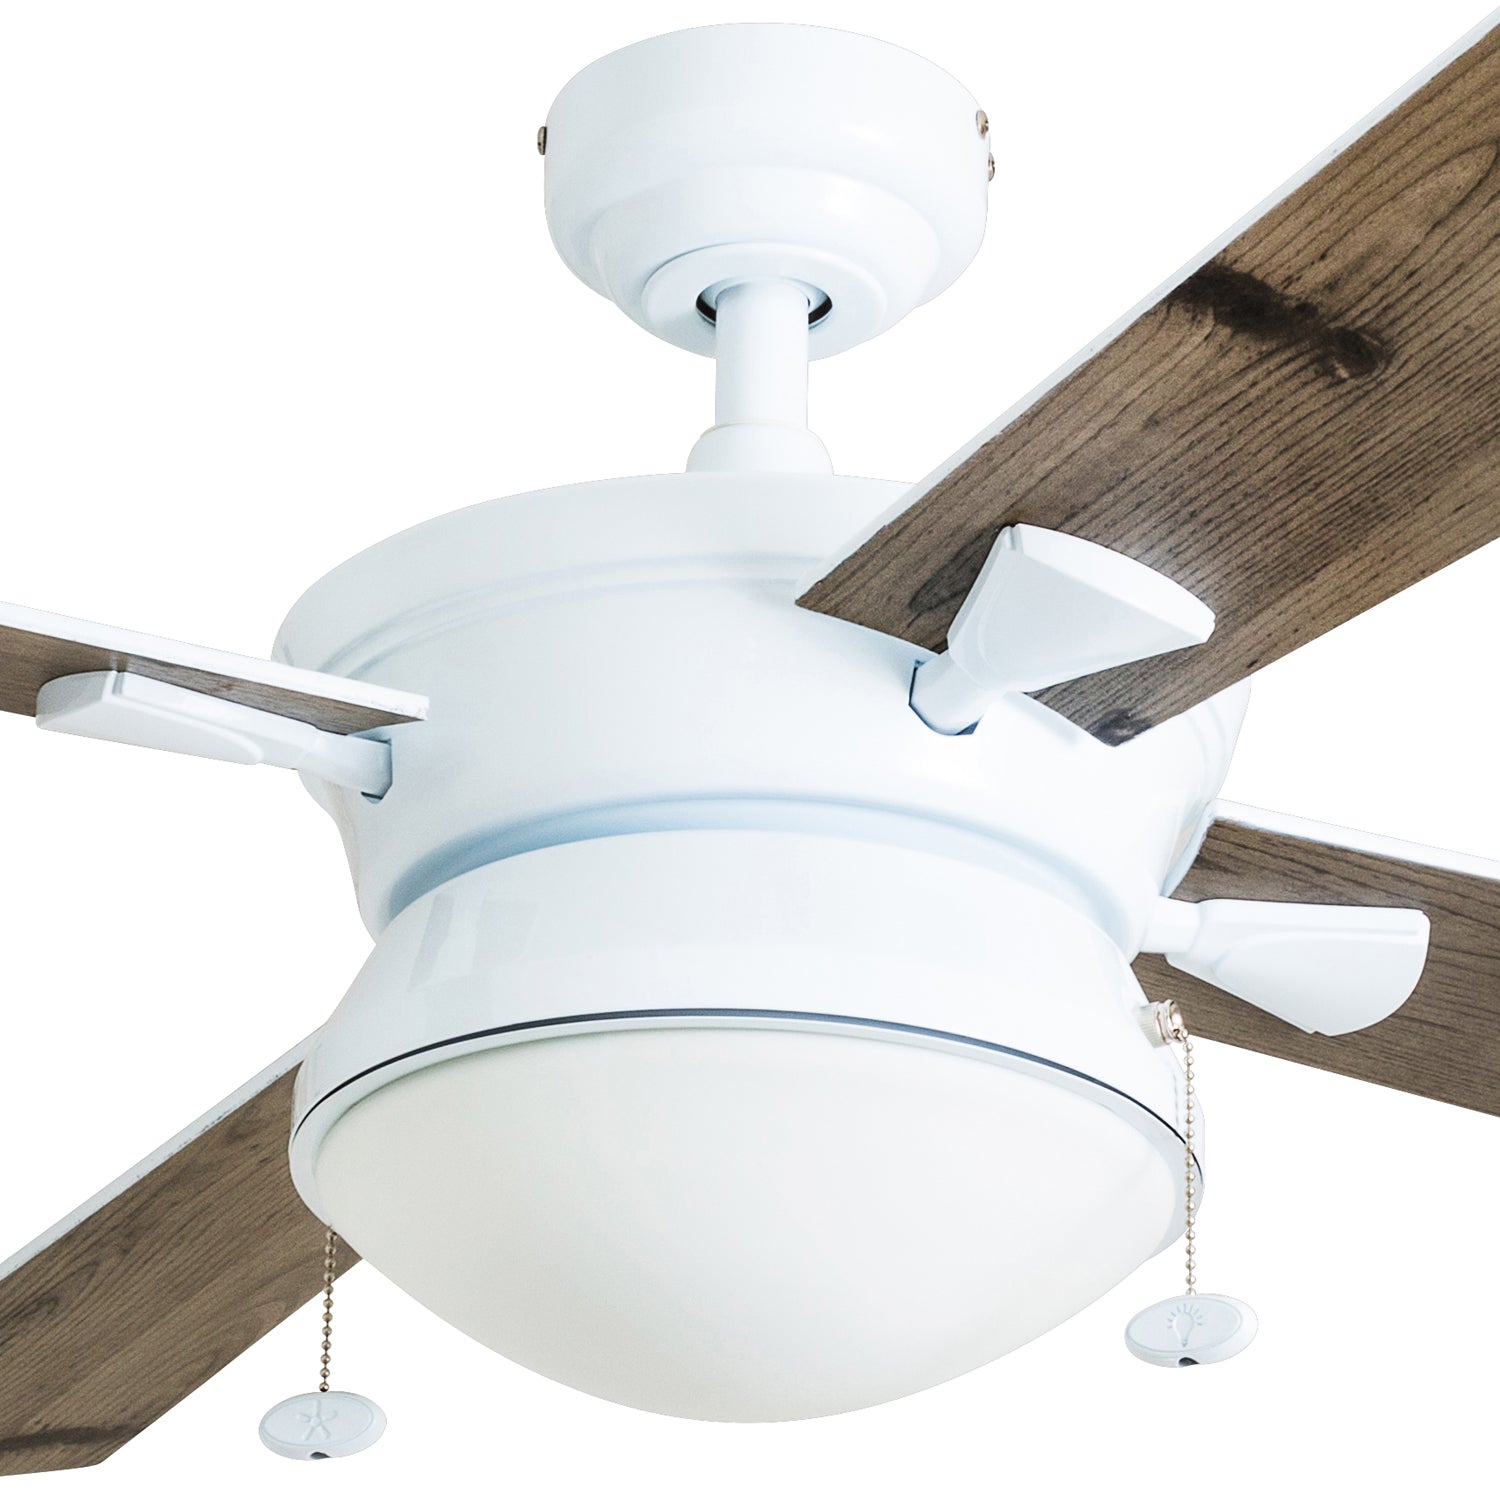 52 Inch Auletta, White, Pull Chain, Indoor/Outdoor Ceiling Fan by Prominence Home